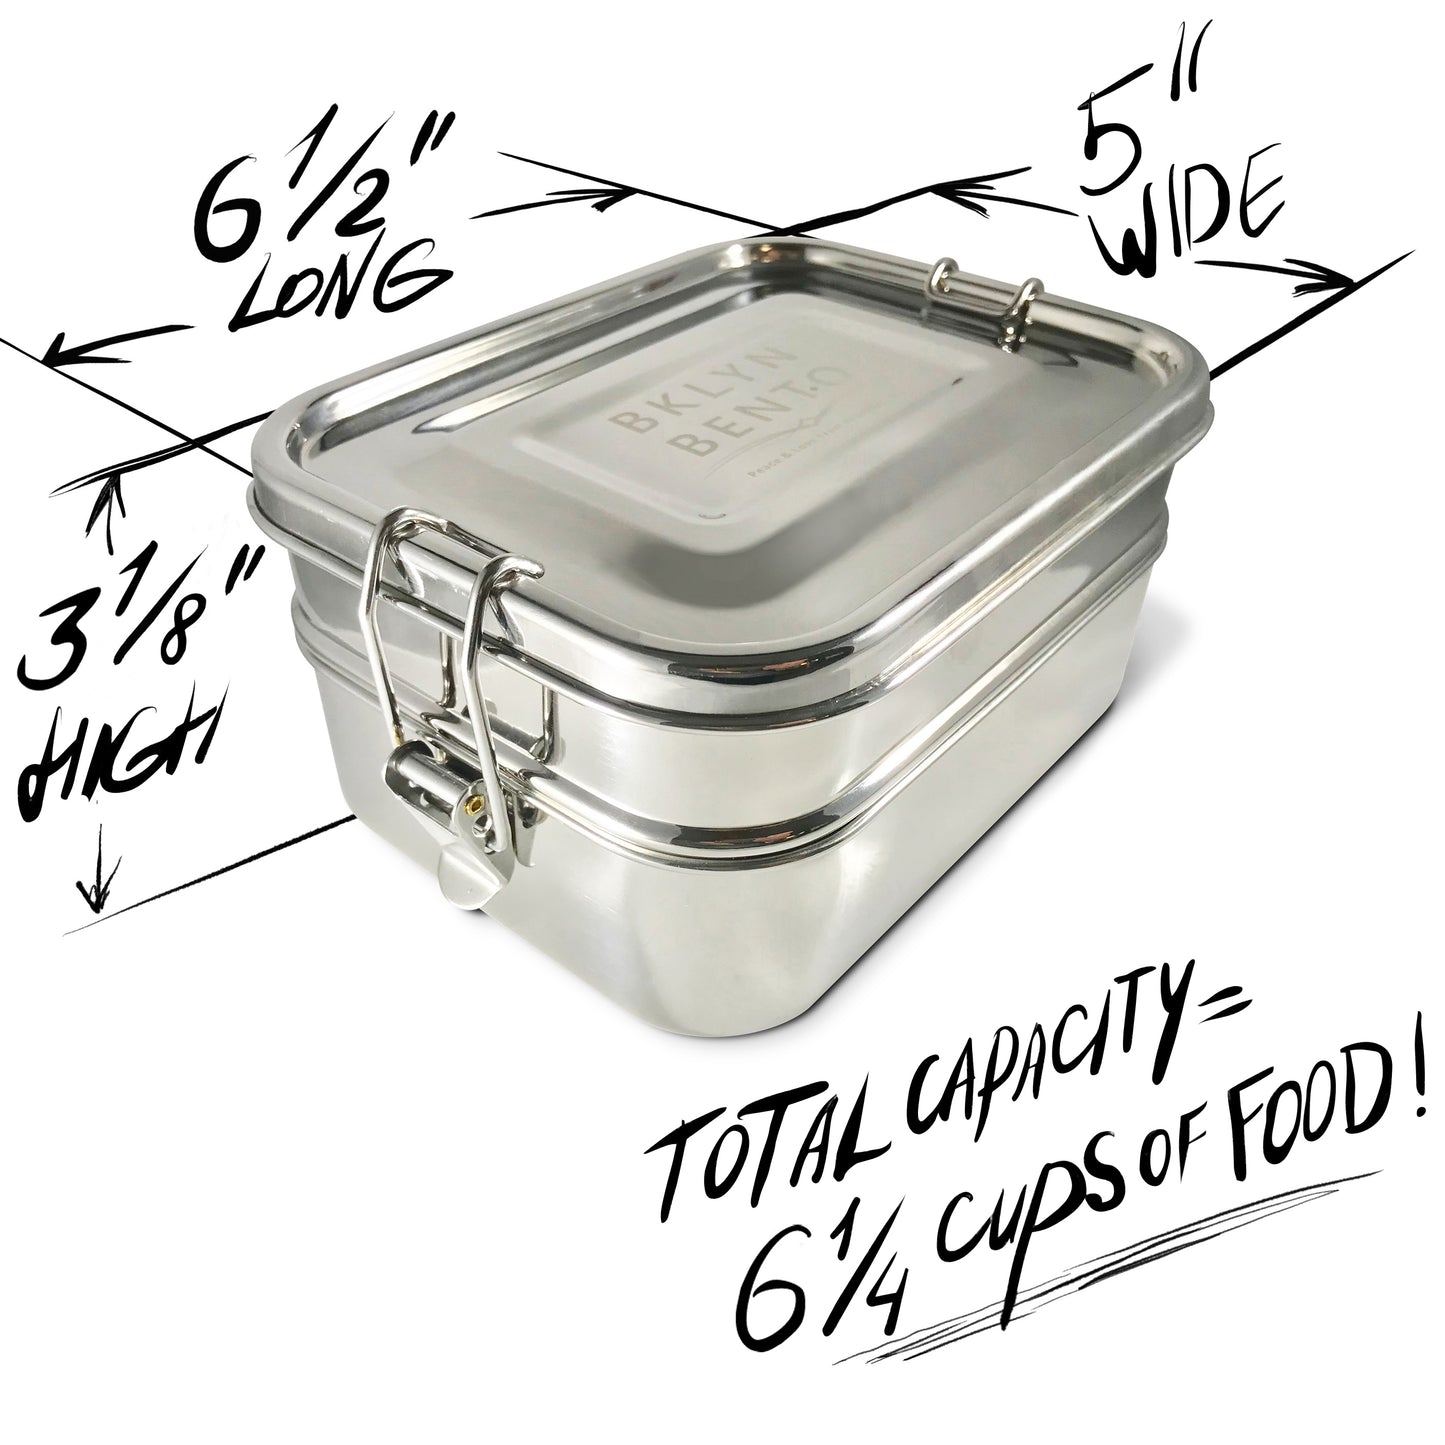 Bklyn Bento 100% Stainless Steel Lunch Box With 3 Separate Compartments - Metal Food Container For Kids And Adults